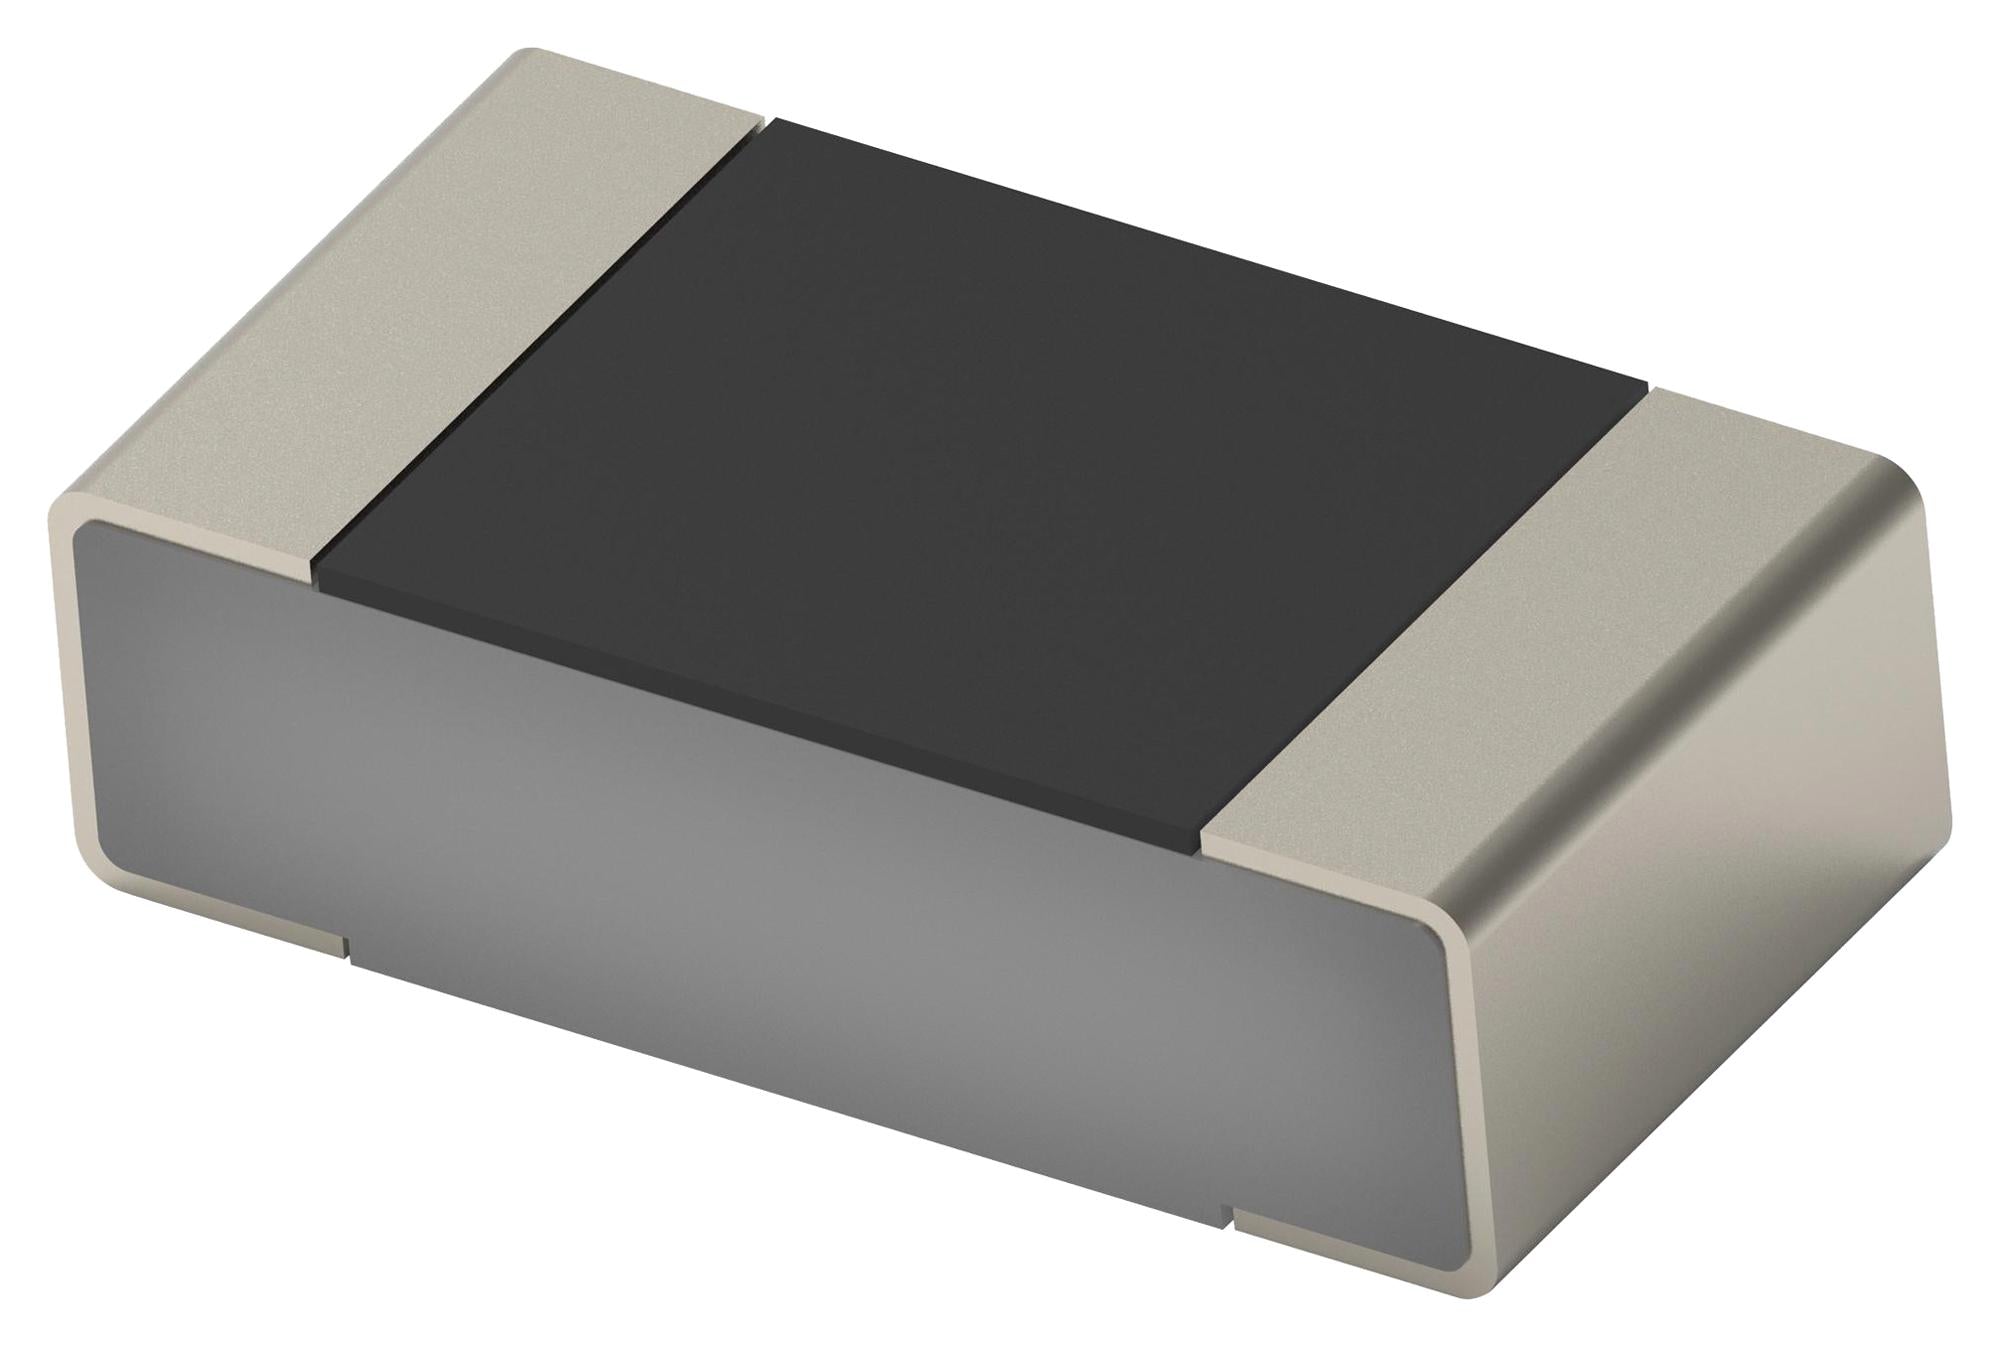 TLRP2B10WR012FTD RES, 0R012, 1W, 1206, METAL STRIP CGS - TE CONNECTIVITY